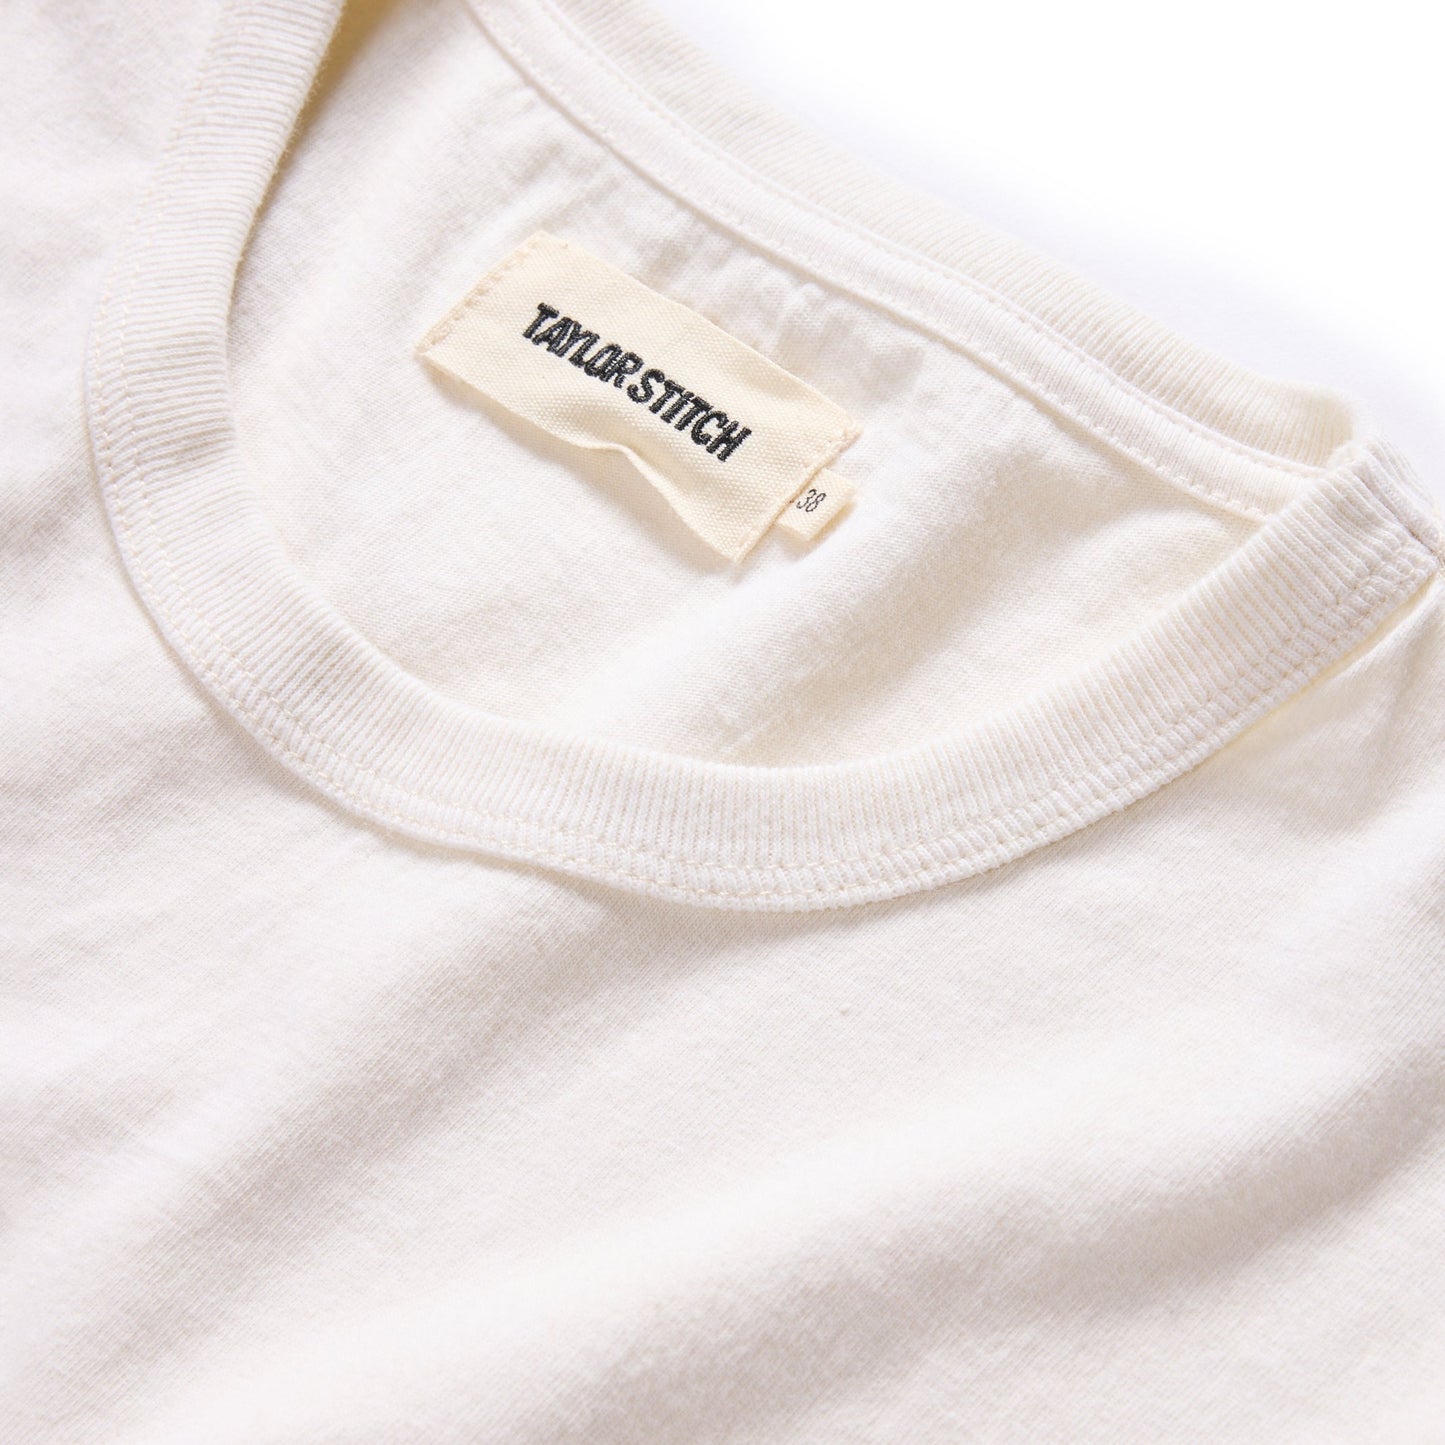 Taylor Stitch - The Organic Cotton Tee in Vintage White